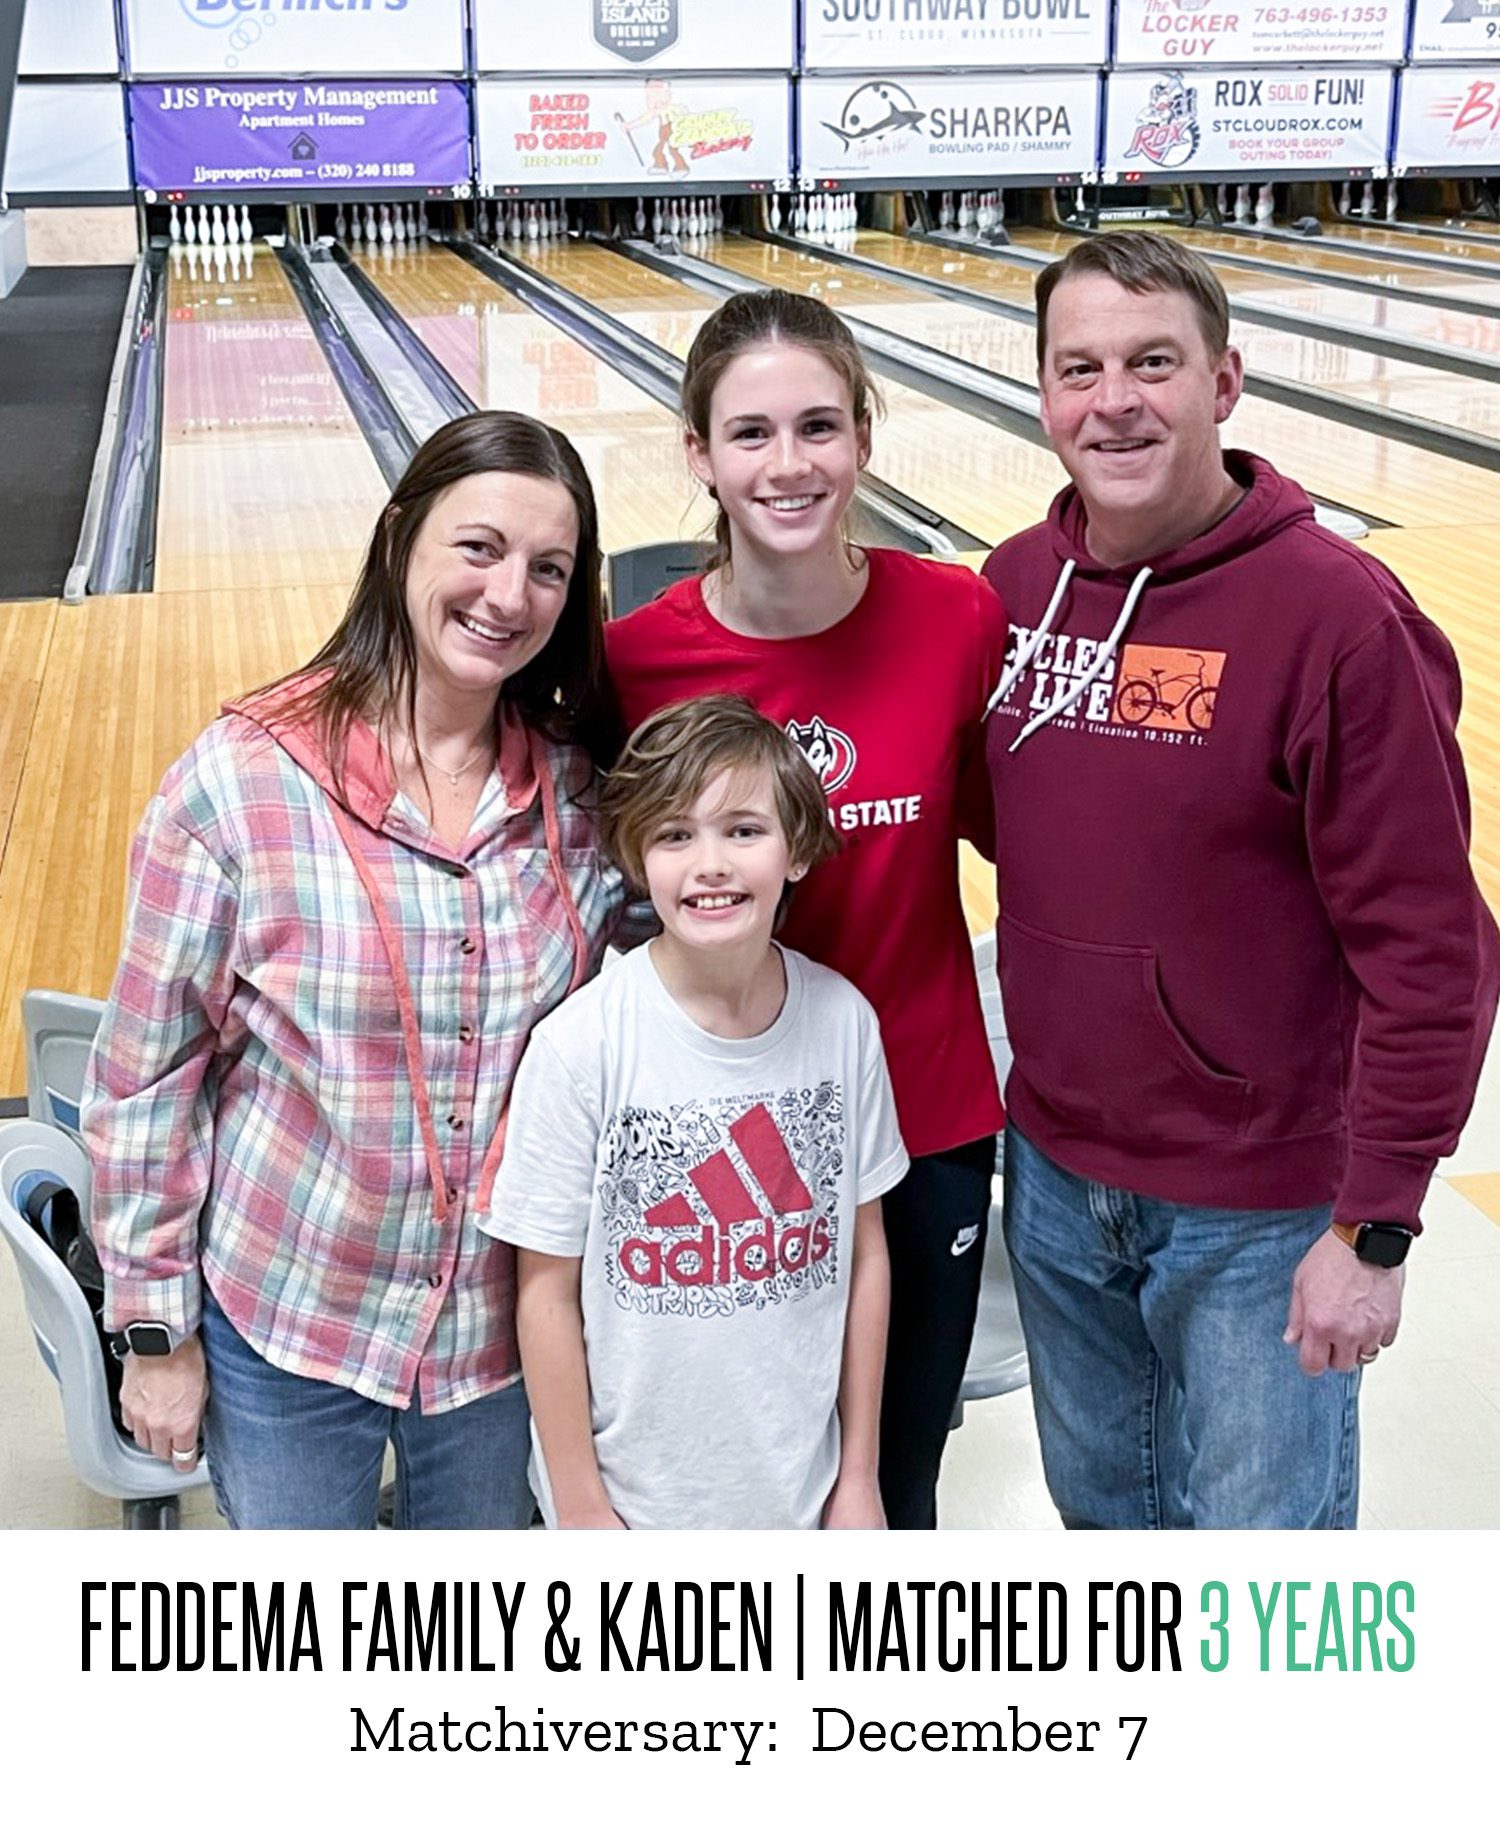 The Feddema Family and Kaden pose for a picture after being matched for three years